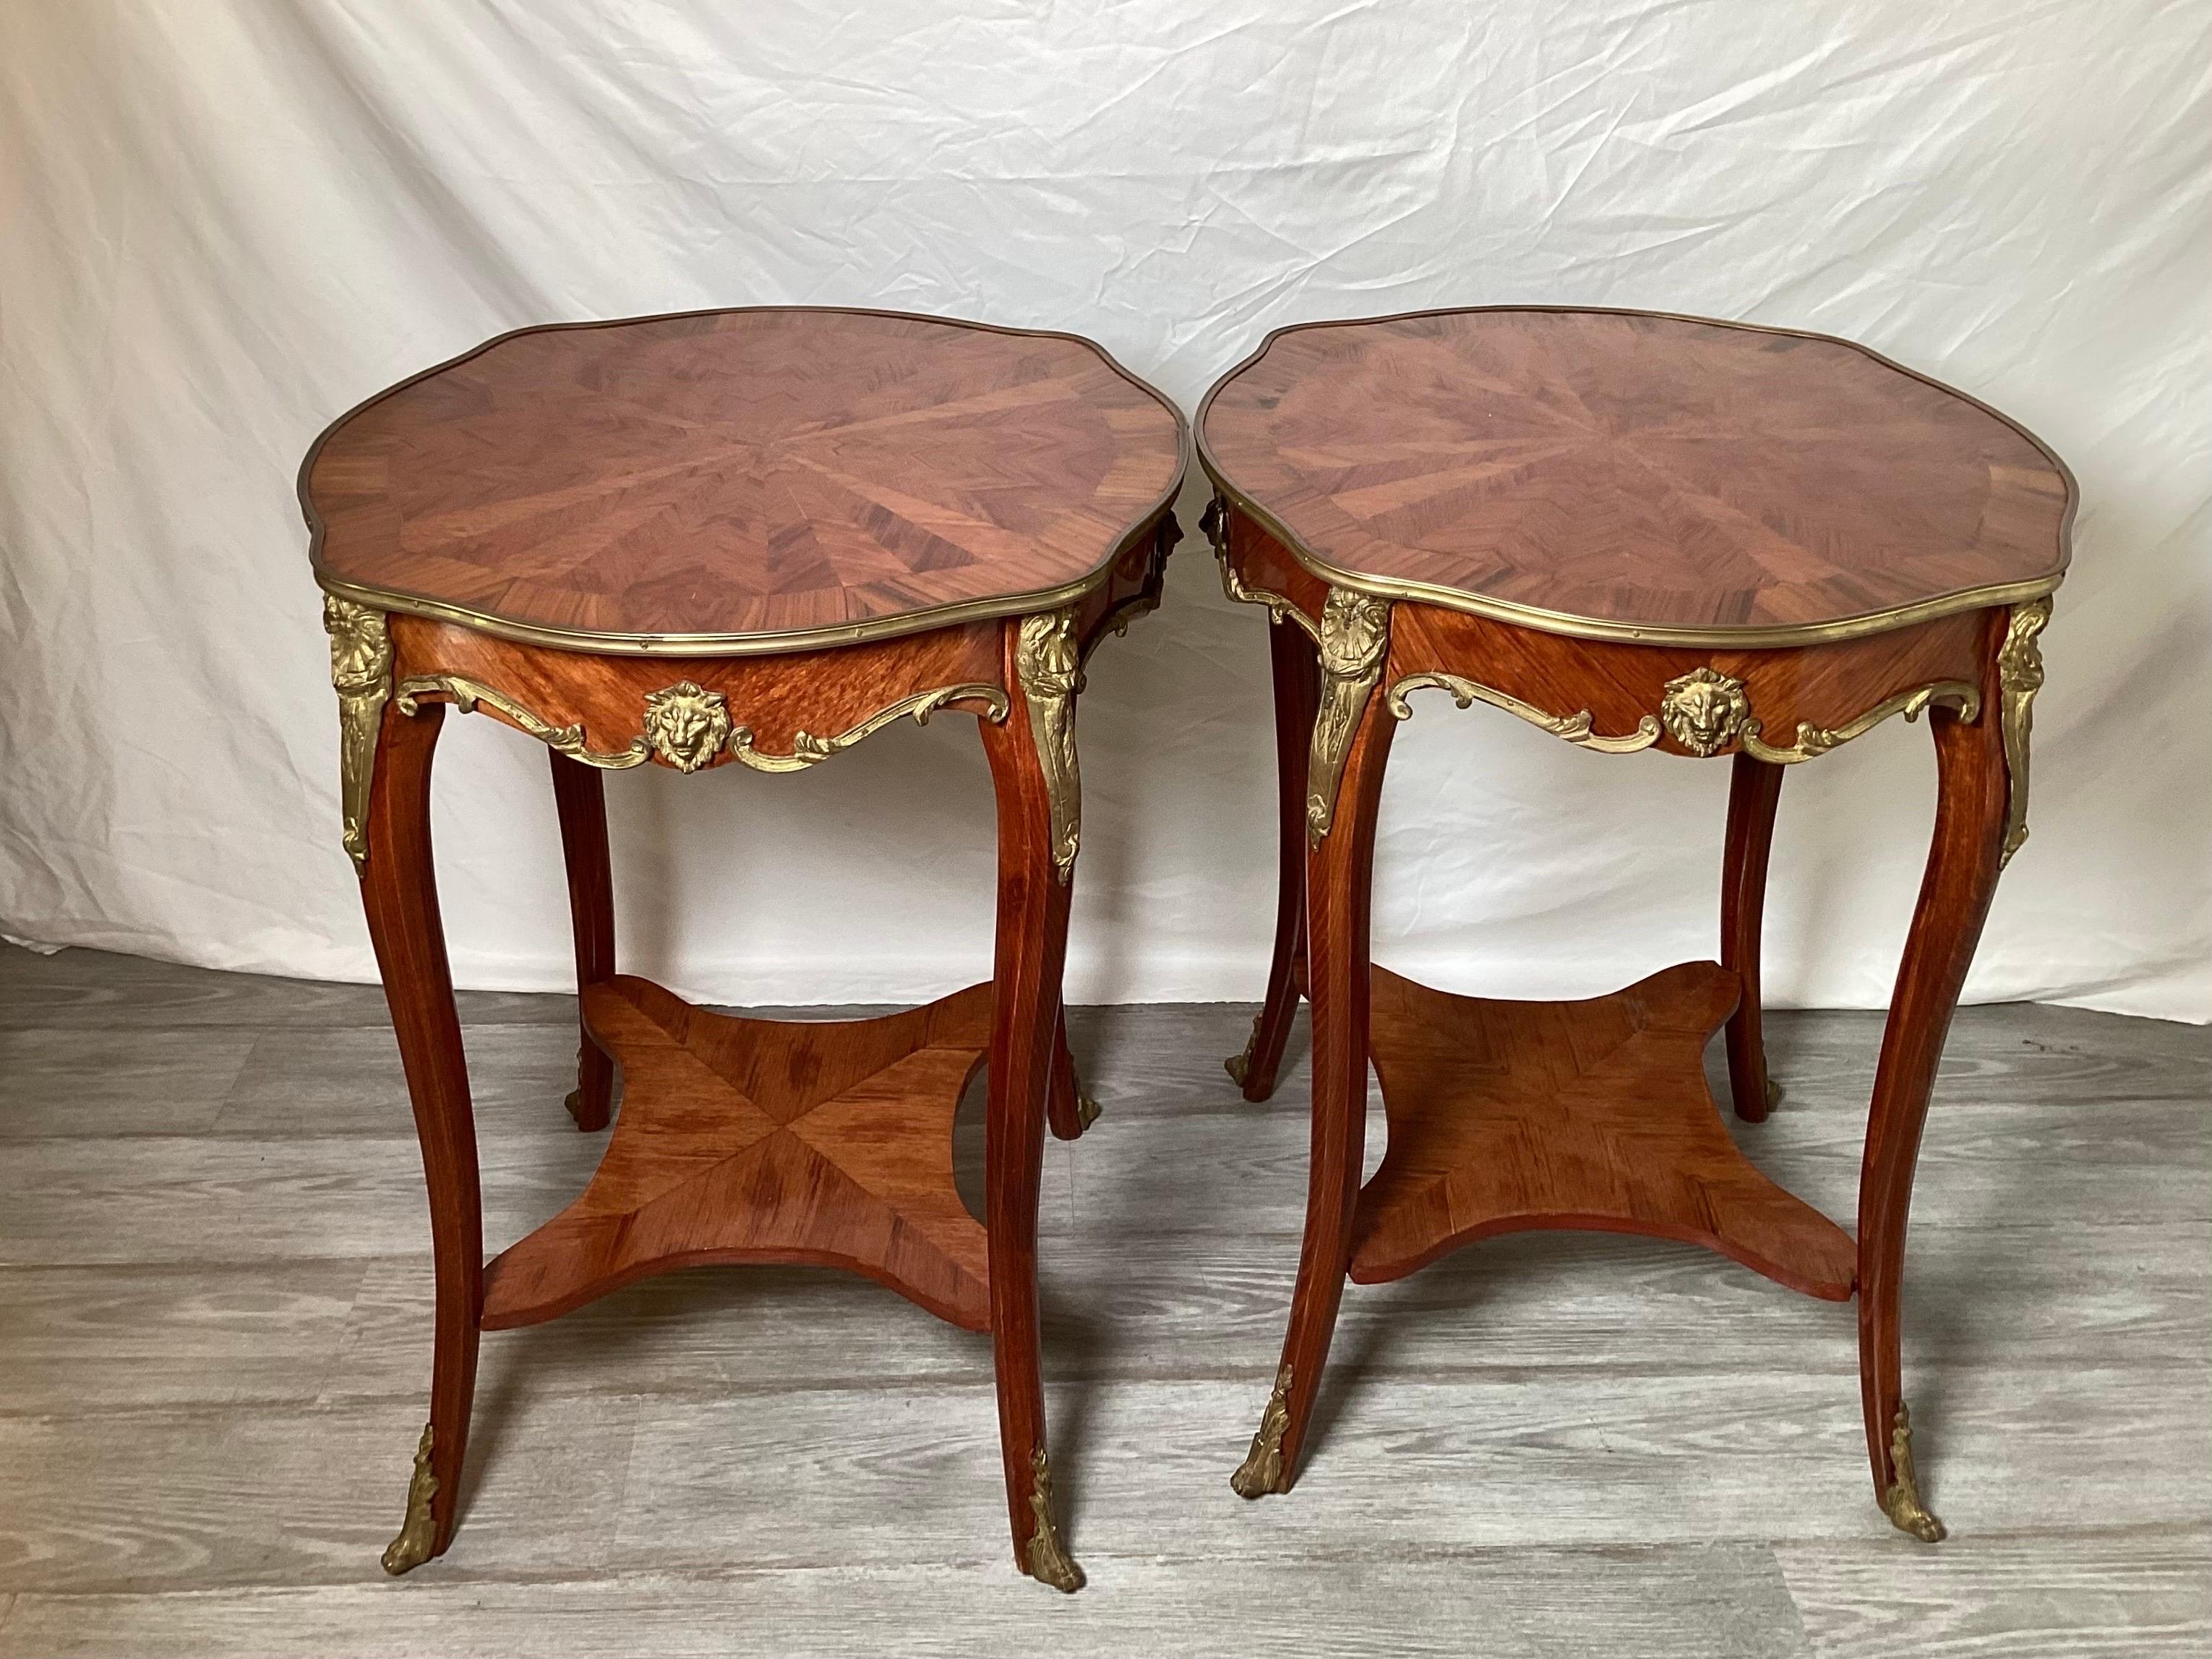 An elegant pair of Louis XV style round tables with inlays of tulipwood, kingwood and others The top and legs with gilt brass mounts with an x stretcher base.